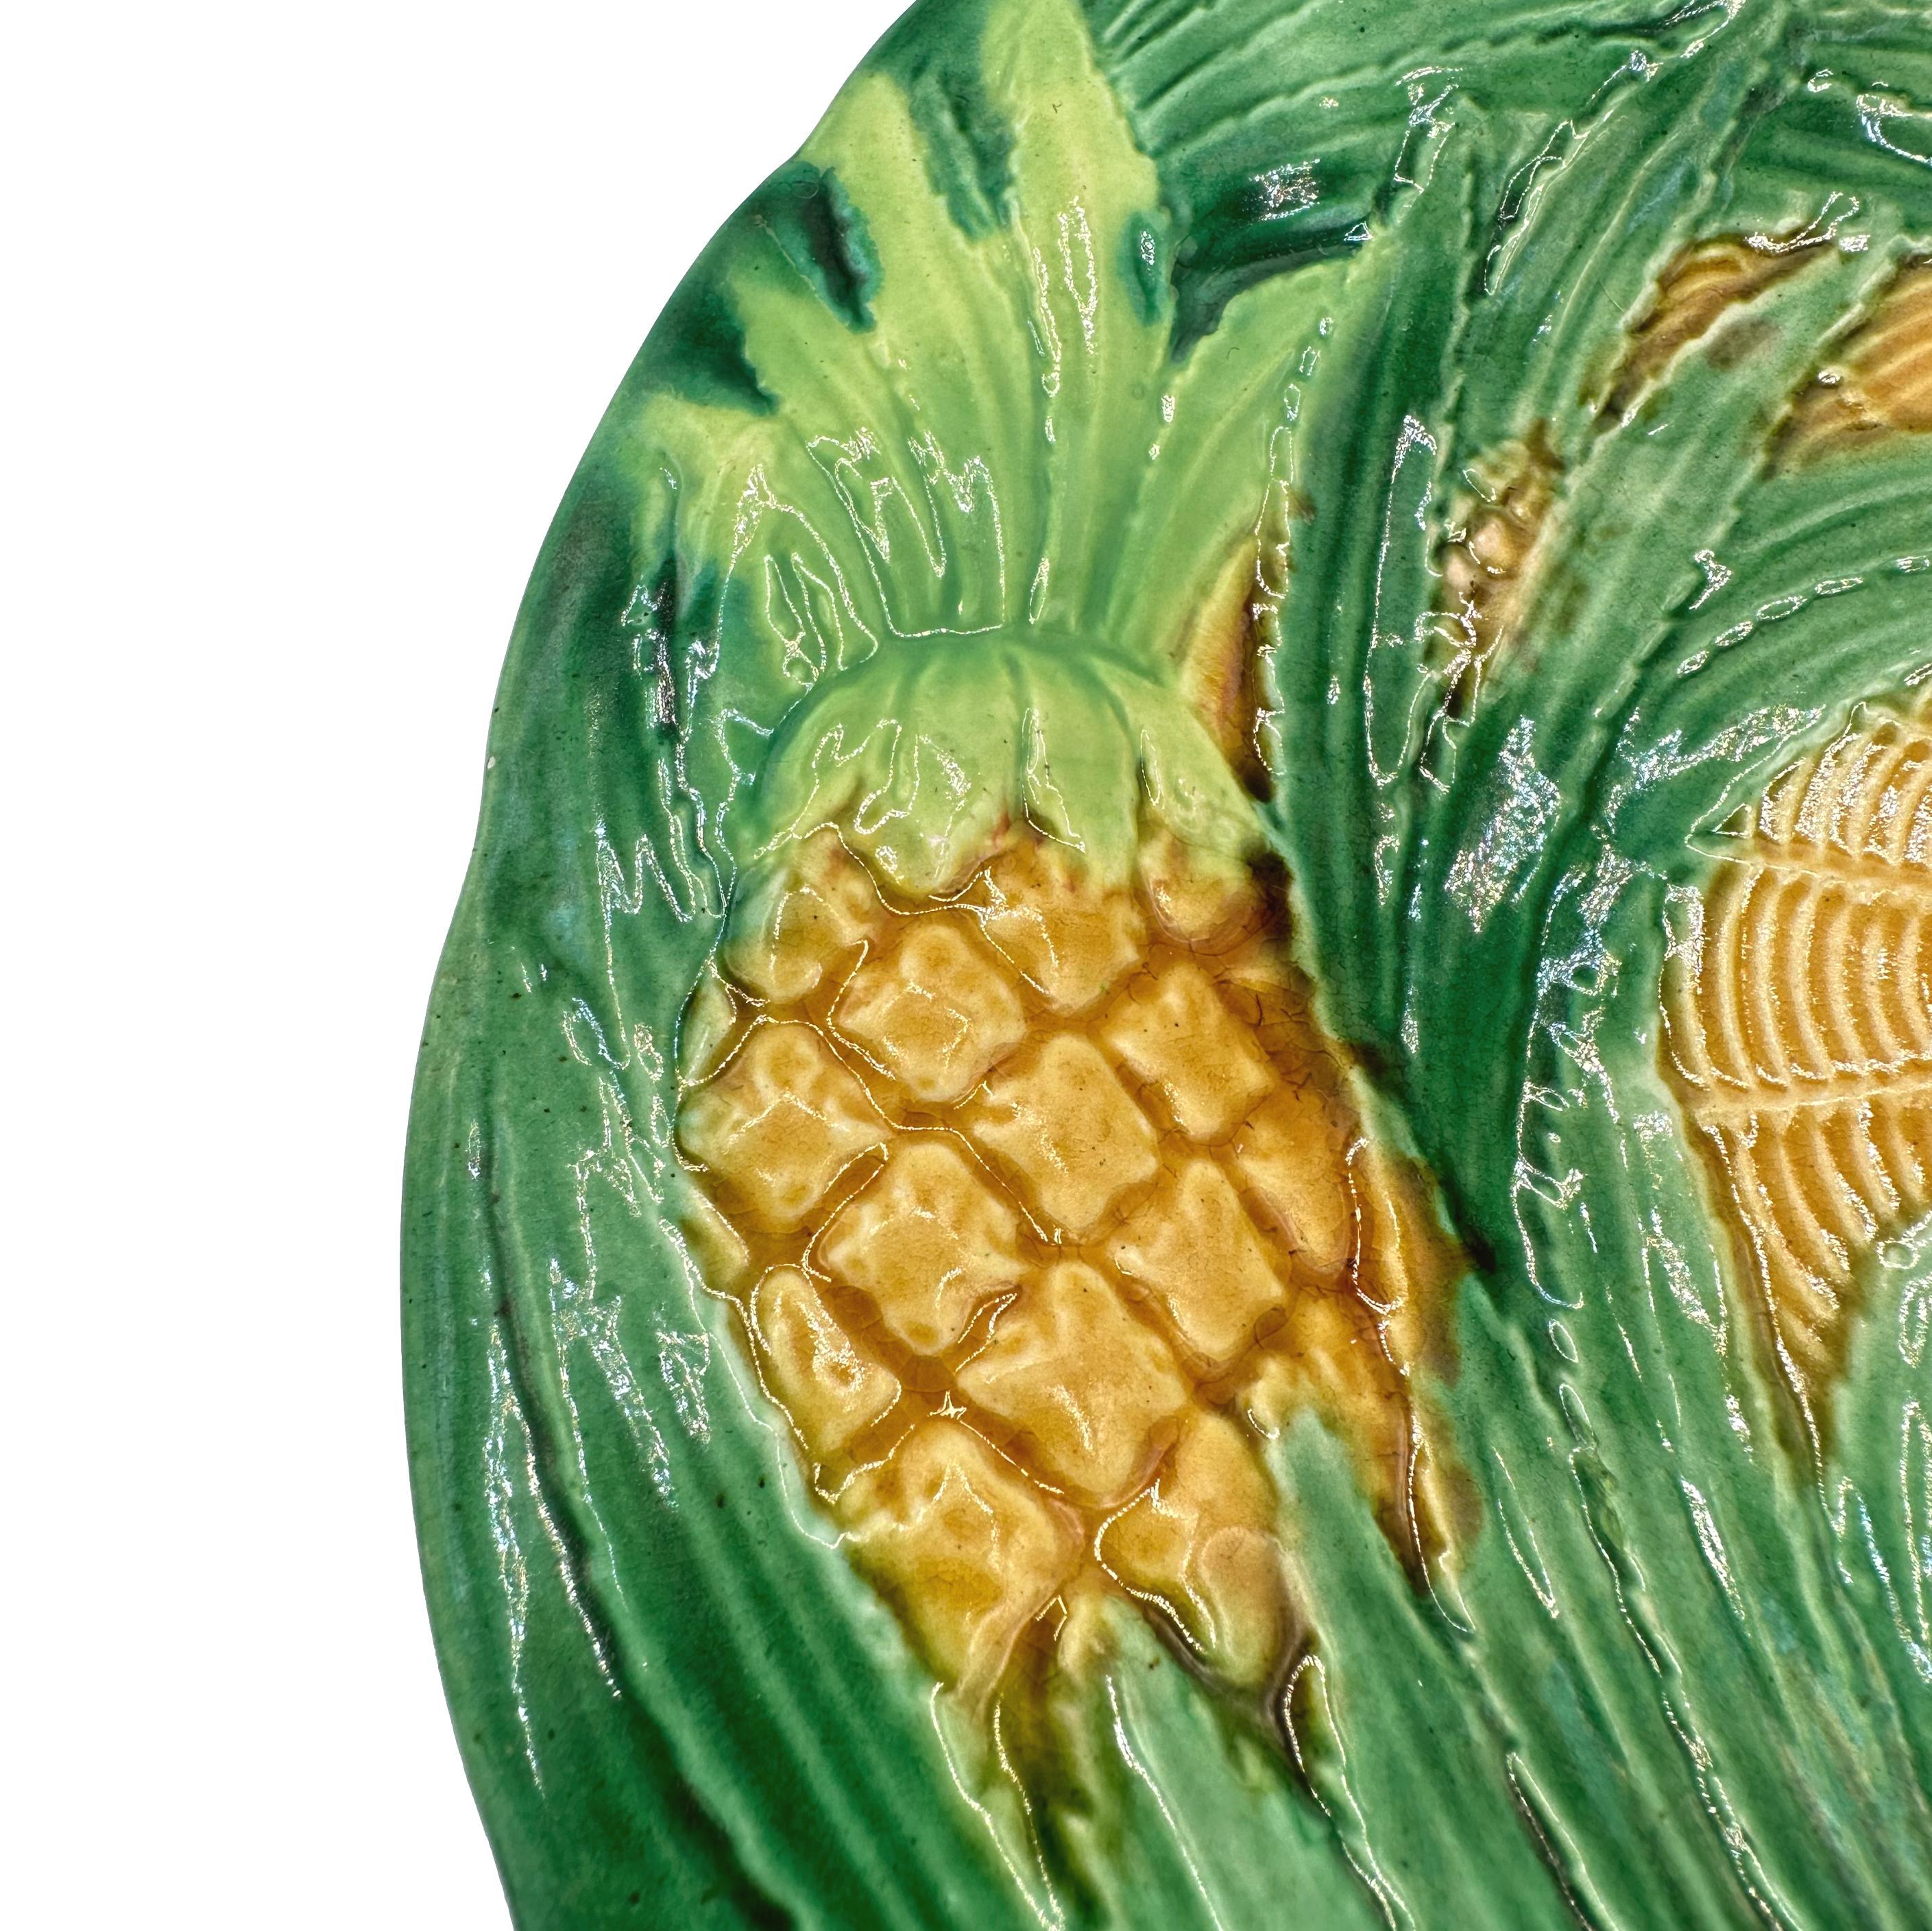 A George Jones Majolica Dessert Plate, with relief-molded pineapples and swirling green-glazed leaves, the center with yellow ocher-glazed simulated basketweave, English, ca. 1870.  Design number 1419. 
LITERATURE:
Robert Cluett, GEORGE JONES